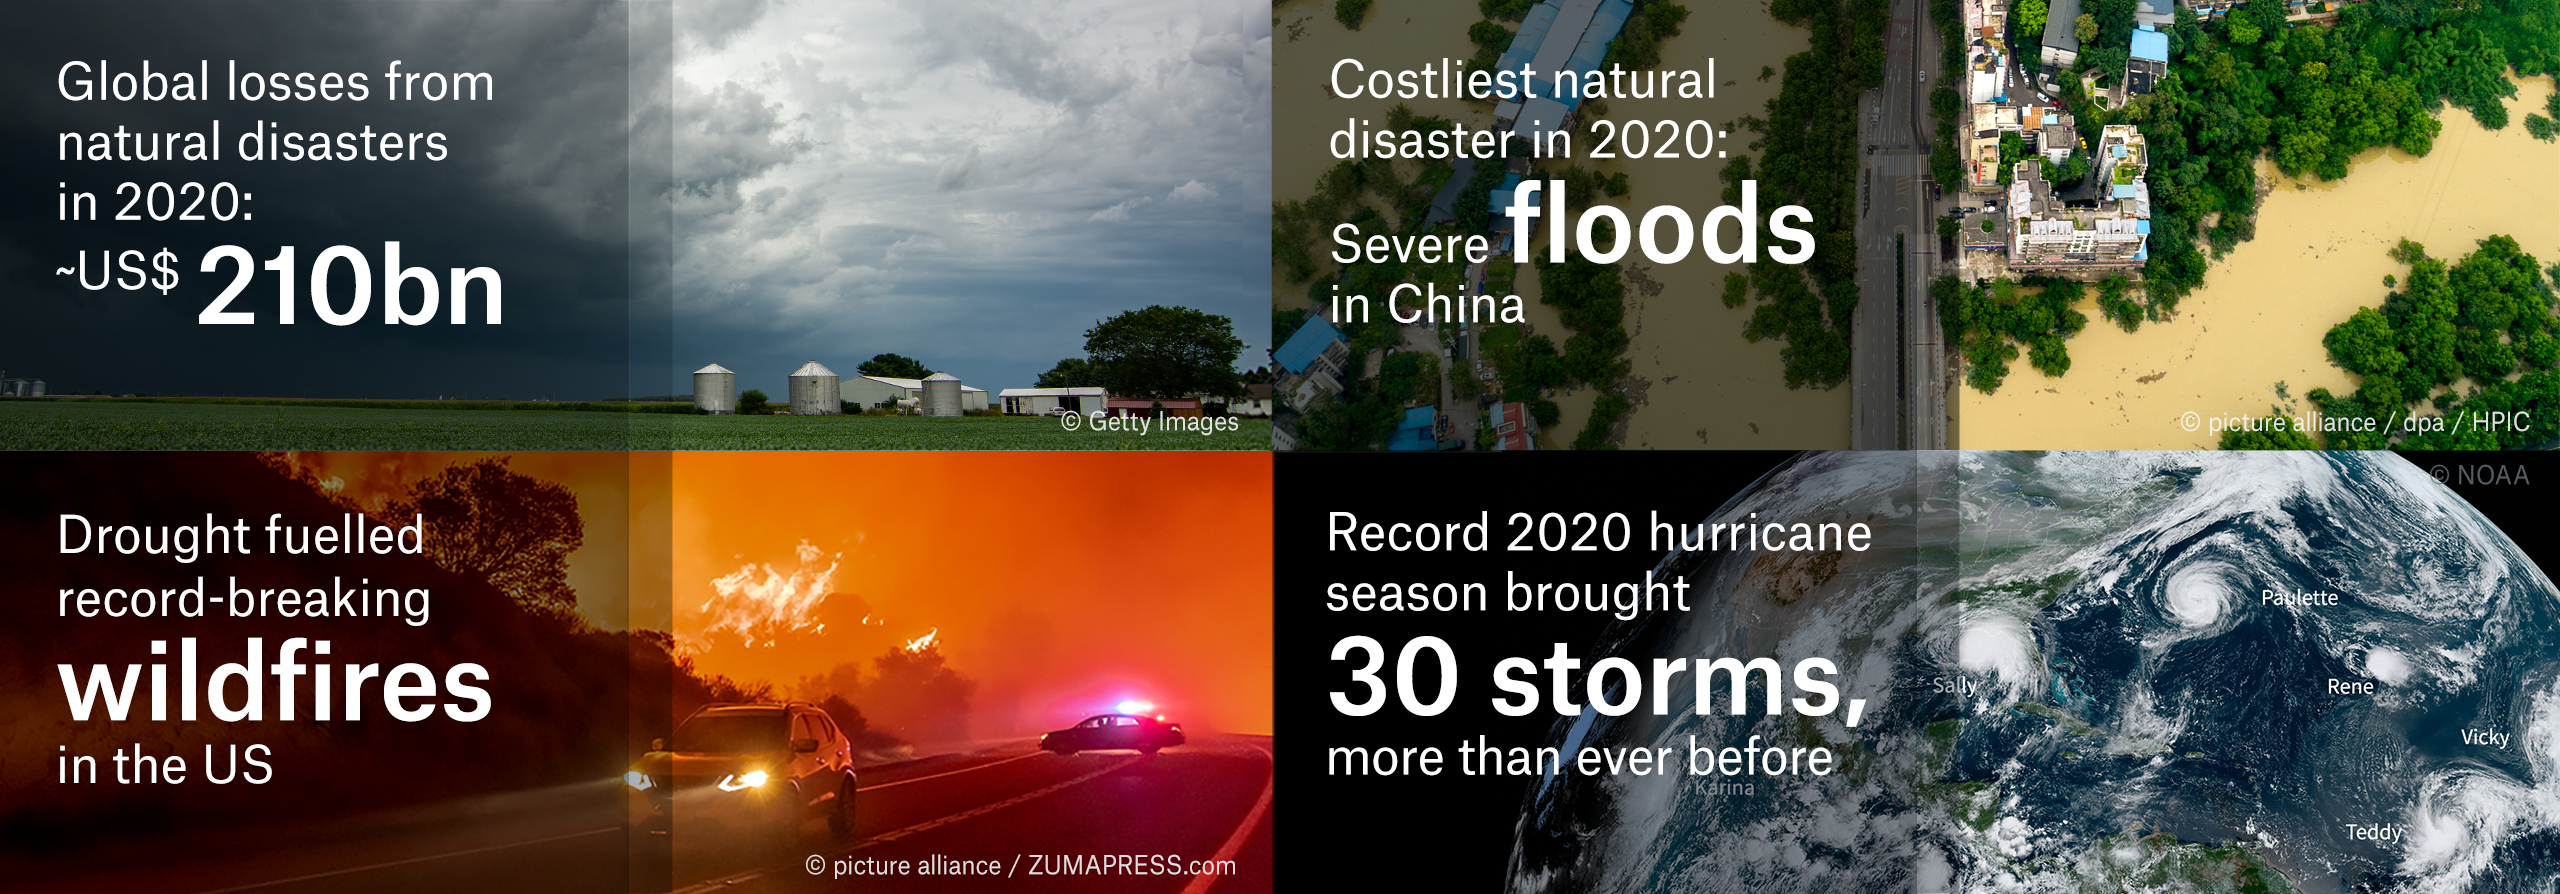 Infographic showing costs of natural disasters in 2020. Global losses from natural disasters in 2020 came to US$210 billion. The hurricane season in the North Atlantic was hyperactive, with a record-setting 30 storms, 13 of which reached hurricane status. Graphic: Munich Re